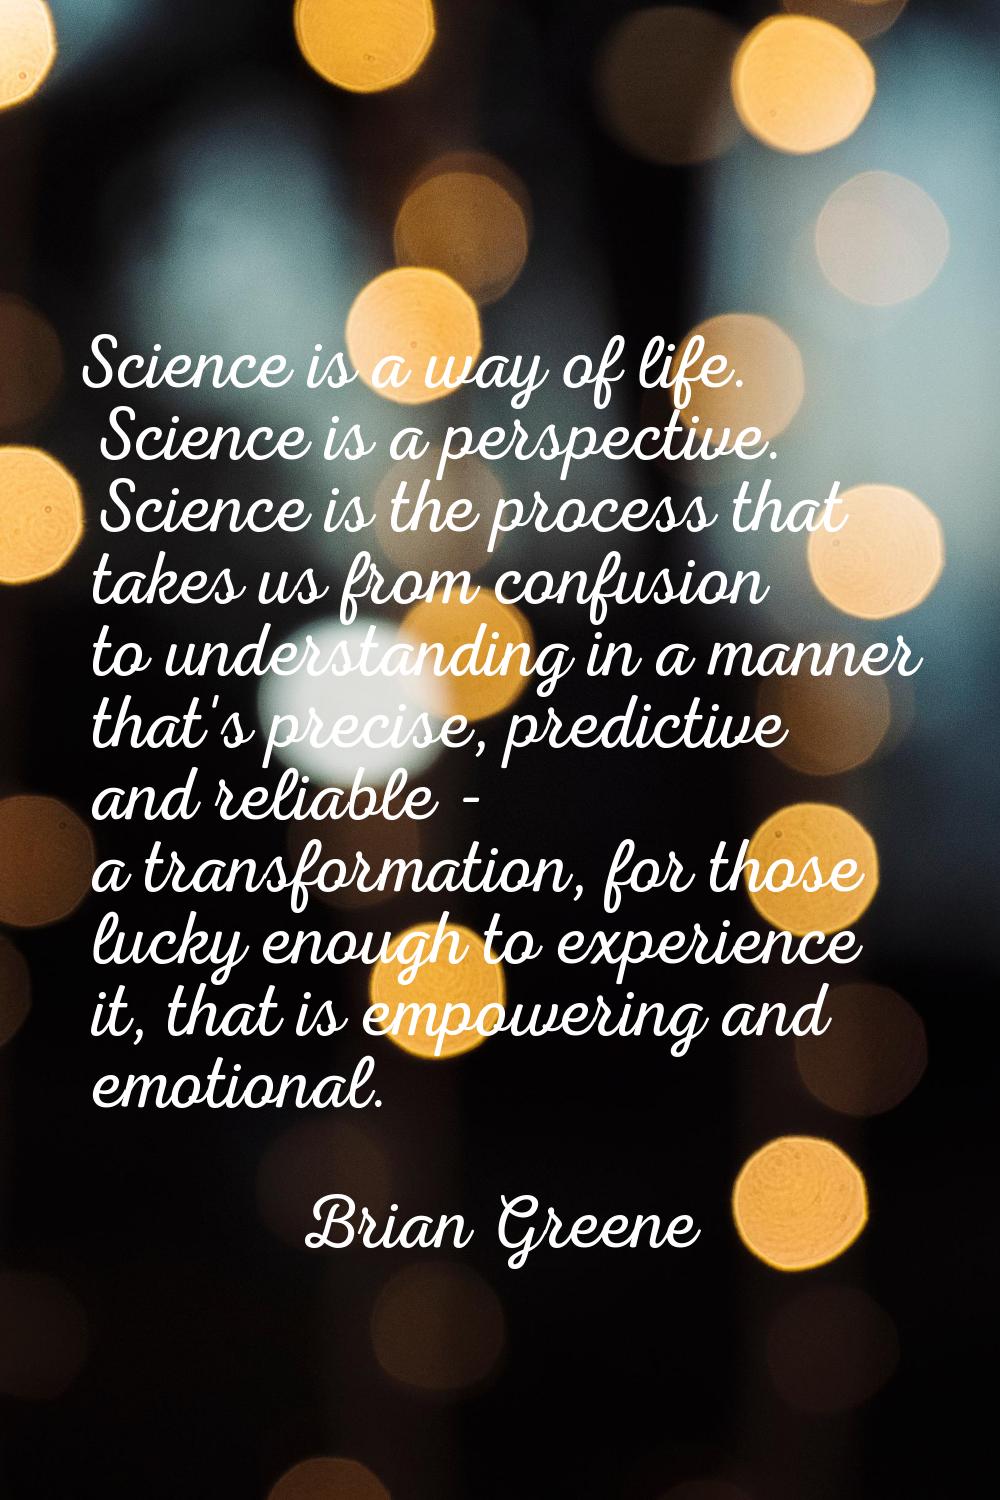 Science is a way of life. Science is a perspective. Science is the process that takes us from confu